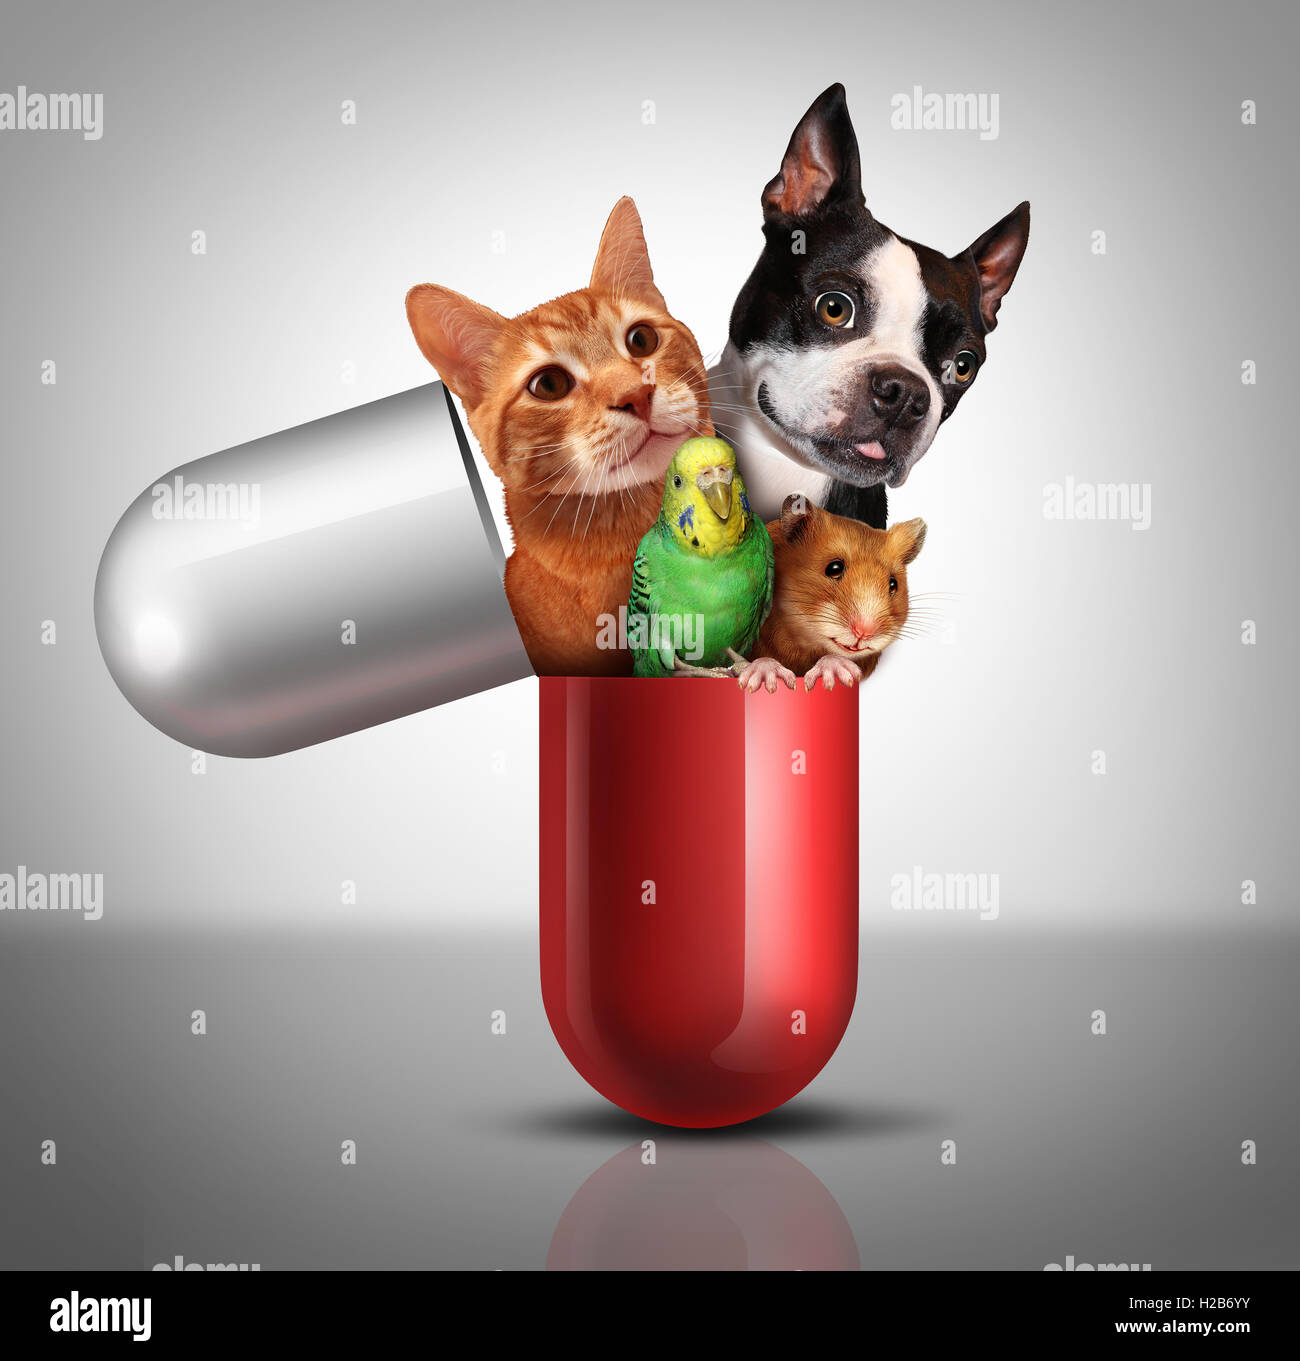 Pet medicine and animal prescription drugs as veterinary pharmaceutical therapy and vet medical concept as a giant pill with a dog cat hamster and bird emerging out of a capsule pill with 3D illustration elements, Stock Photo